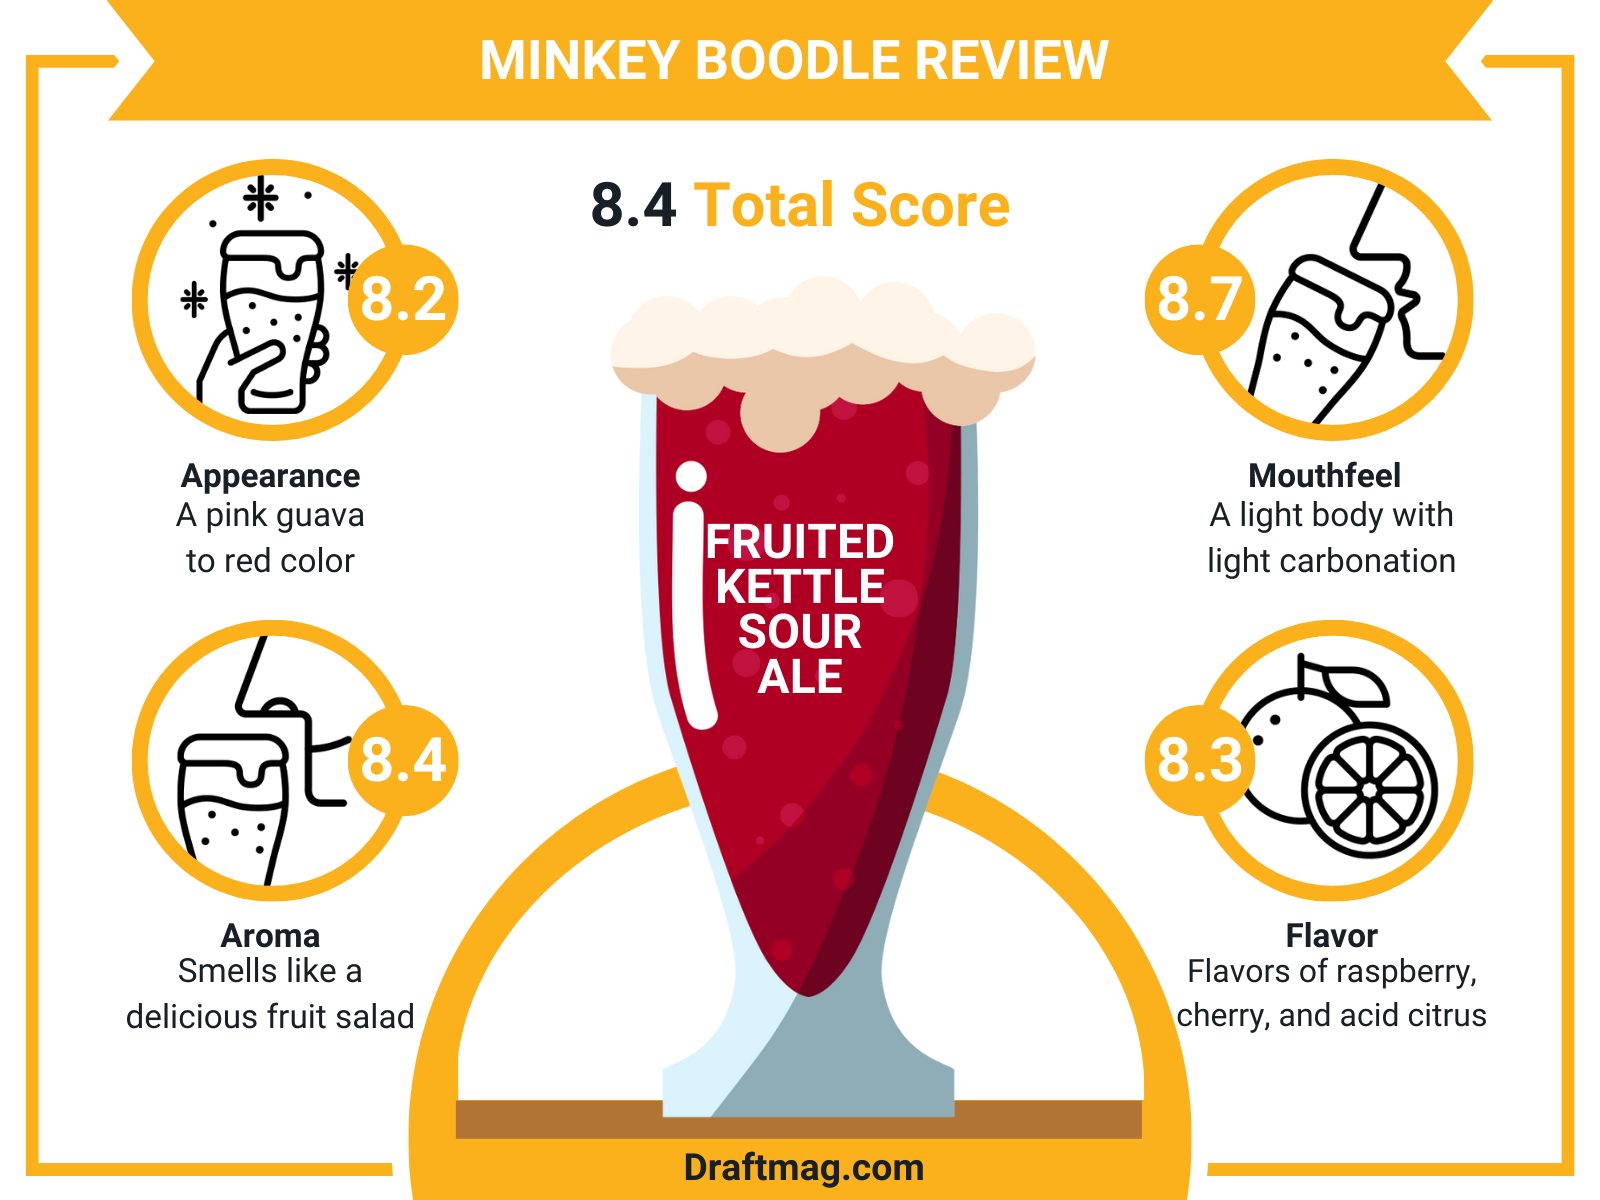 Minkey Boodle Review Infographic